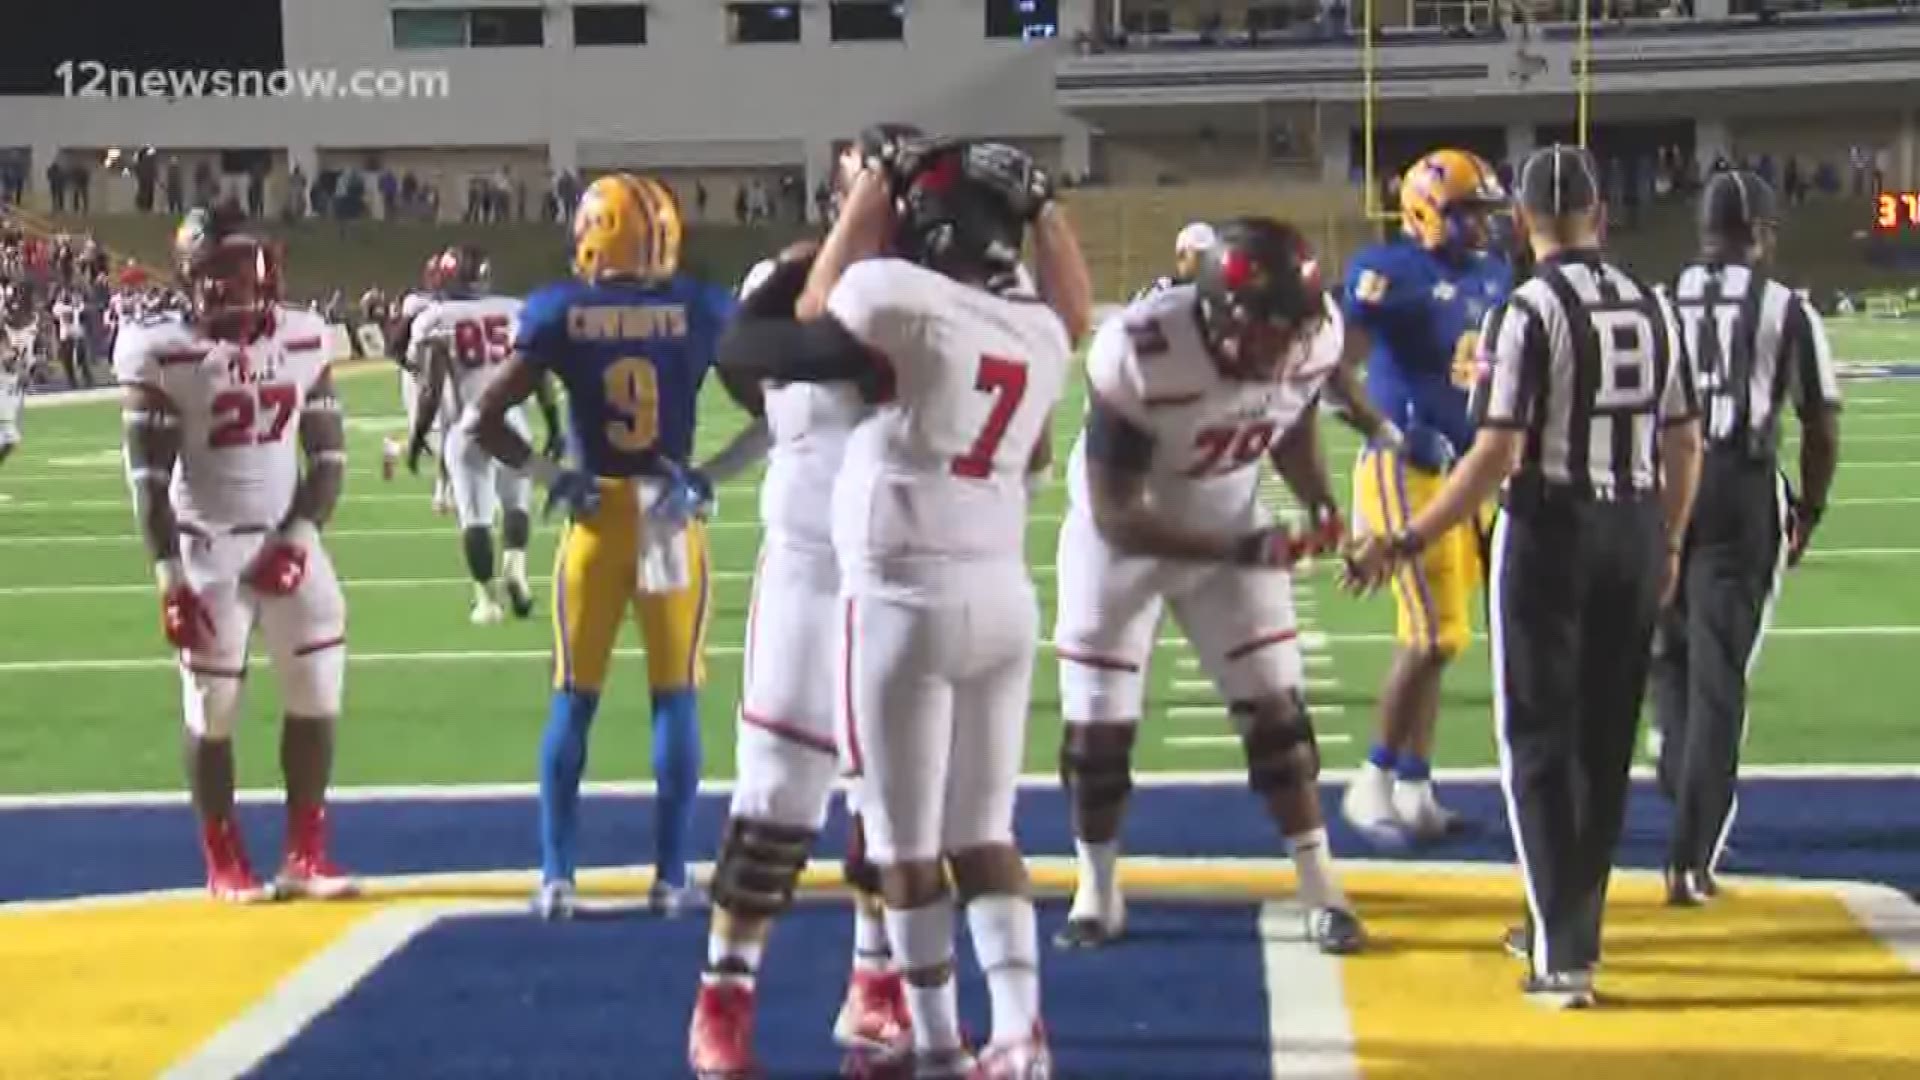 A four game losing streak early in the season had some Lamar students losing hope.